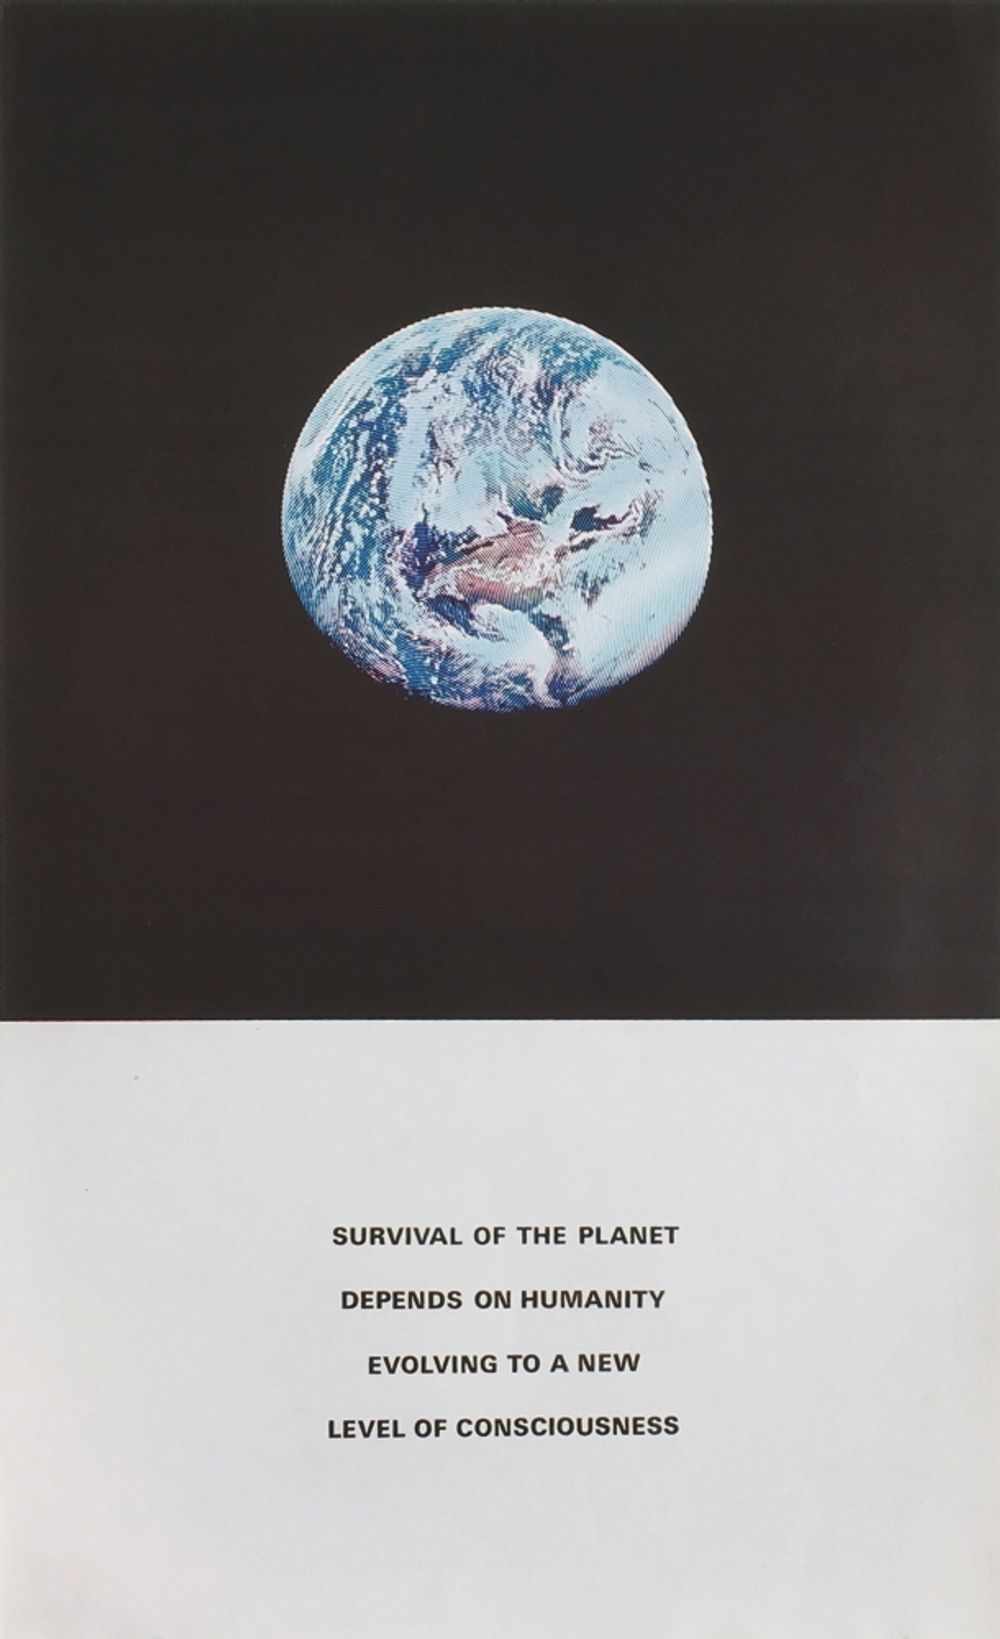 Survival of the planet